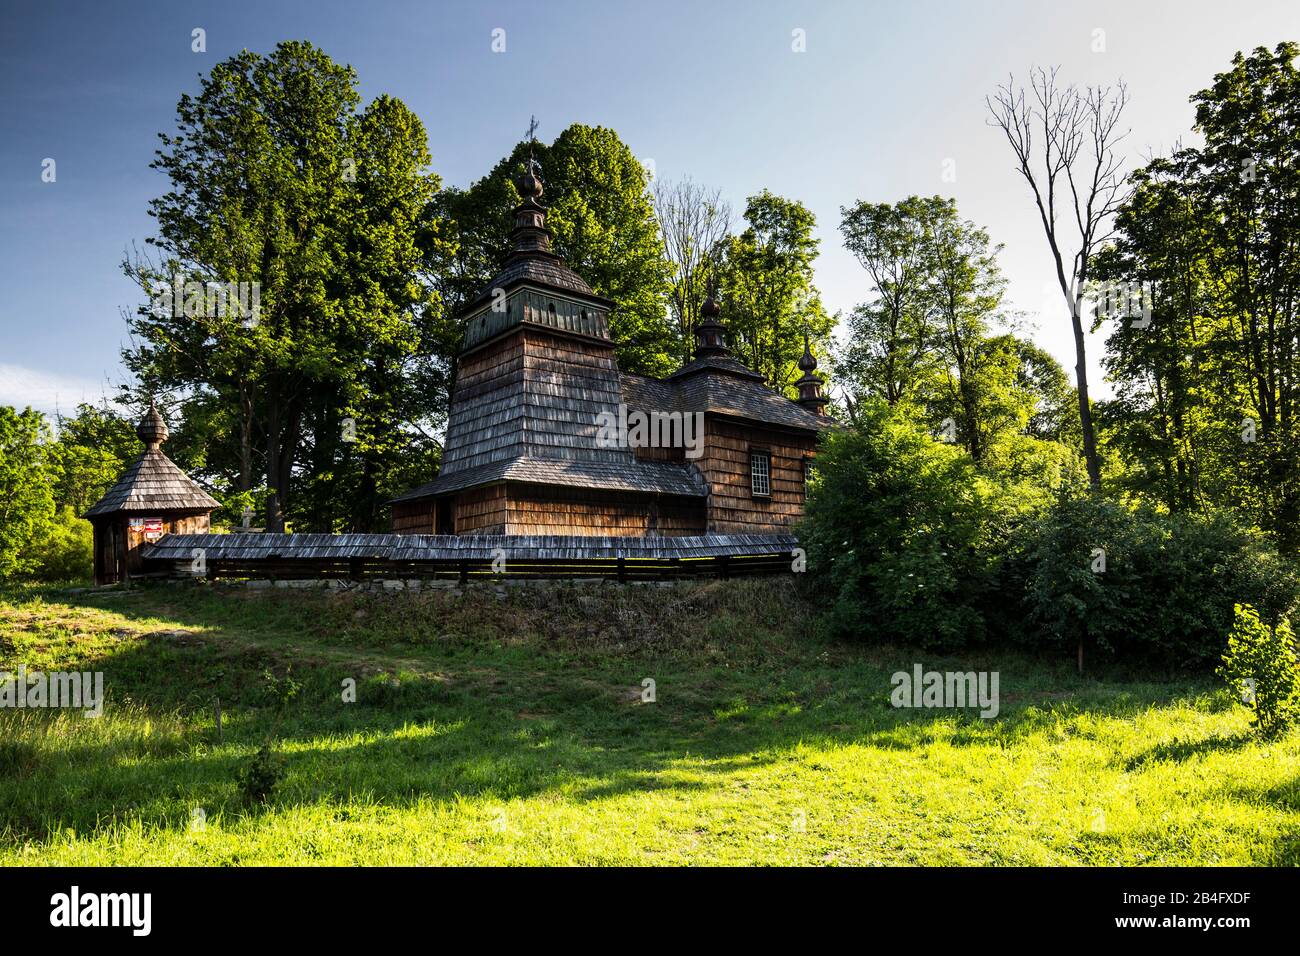 Europe, Poland, Lesser Poland Province, Wooden Architecture Route, The Greek Catholic Parish Church of St. Cosmas and St. Damian in Bartne Stock Photo